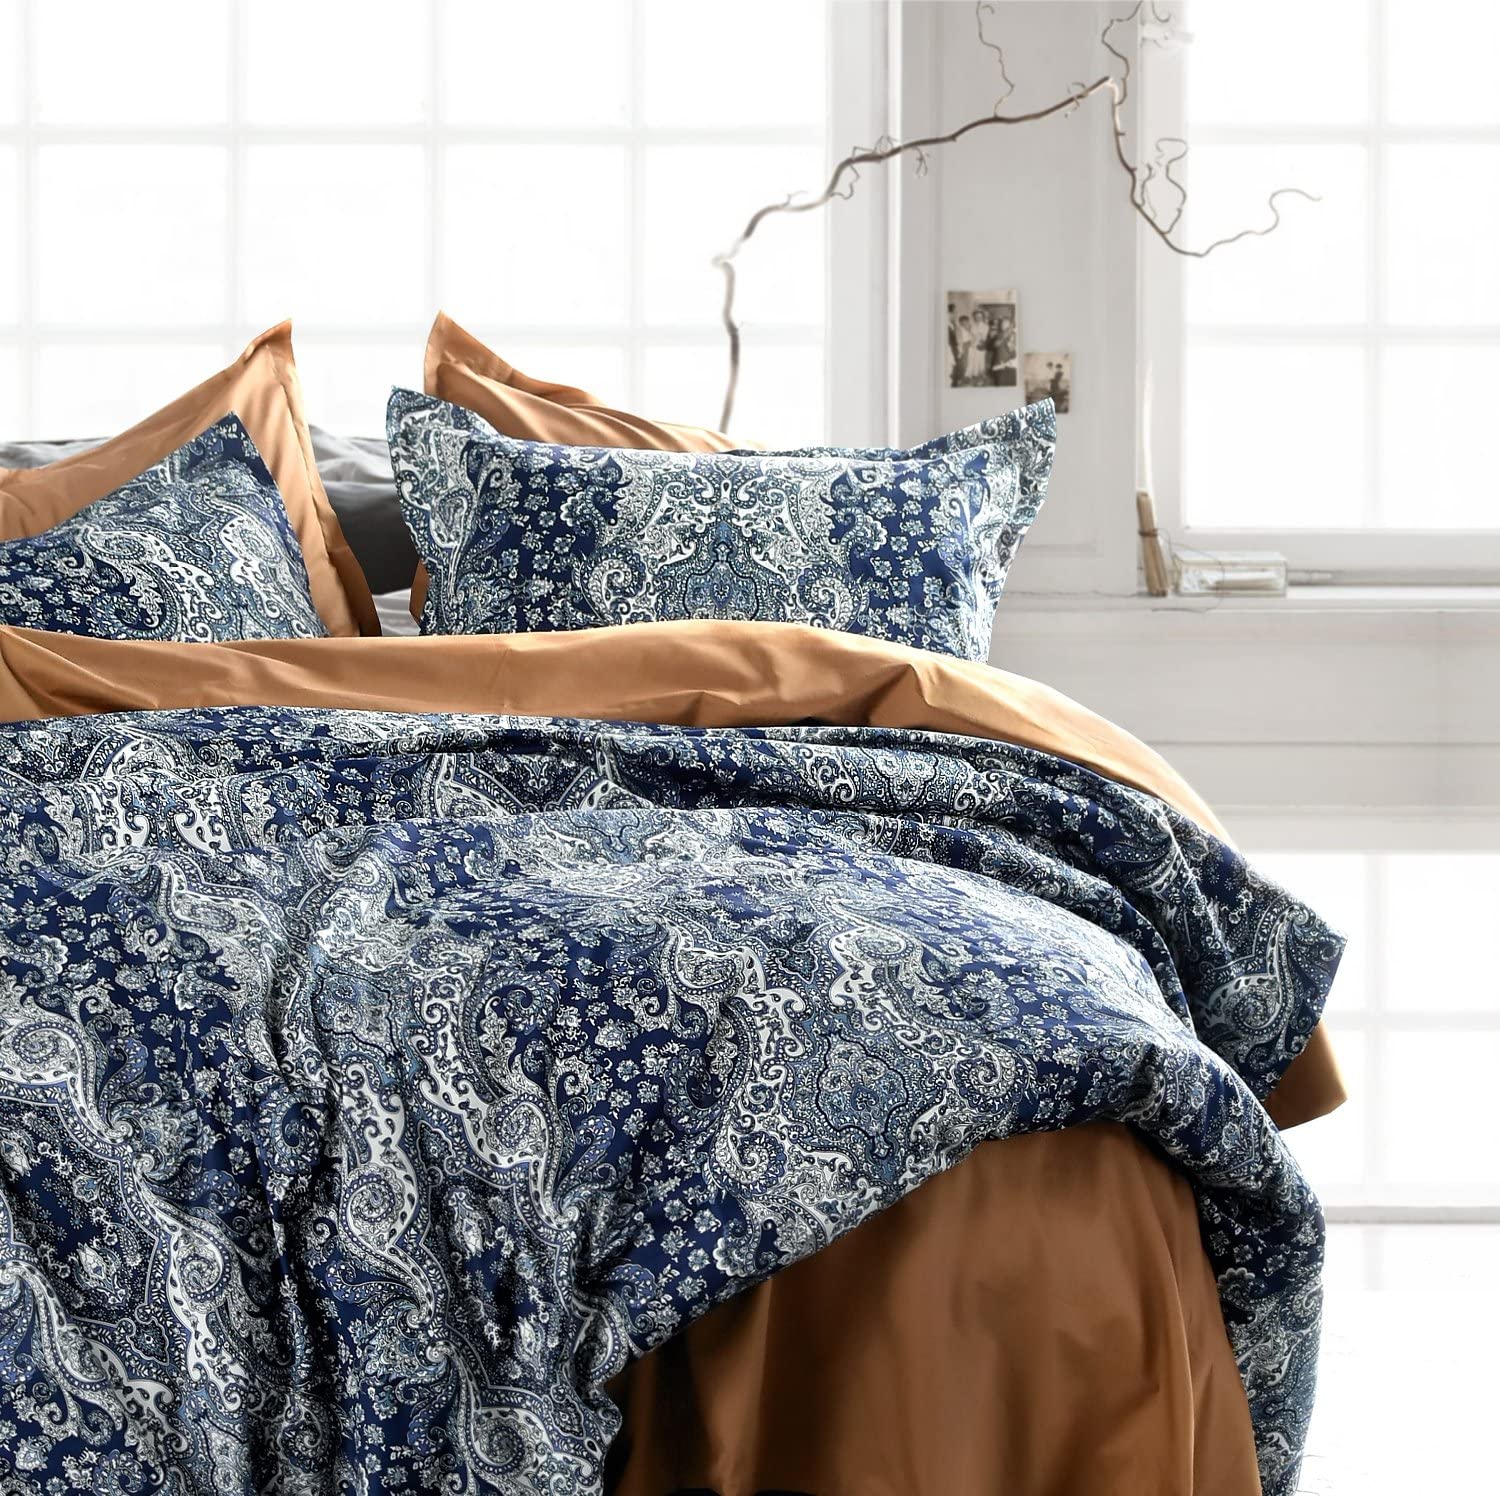 Intricate Paisley Scroll Duvet Quilt, Tapestry King Bedding